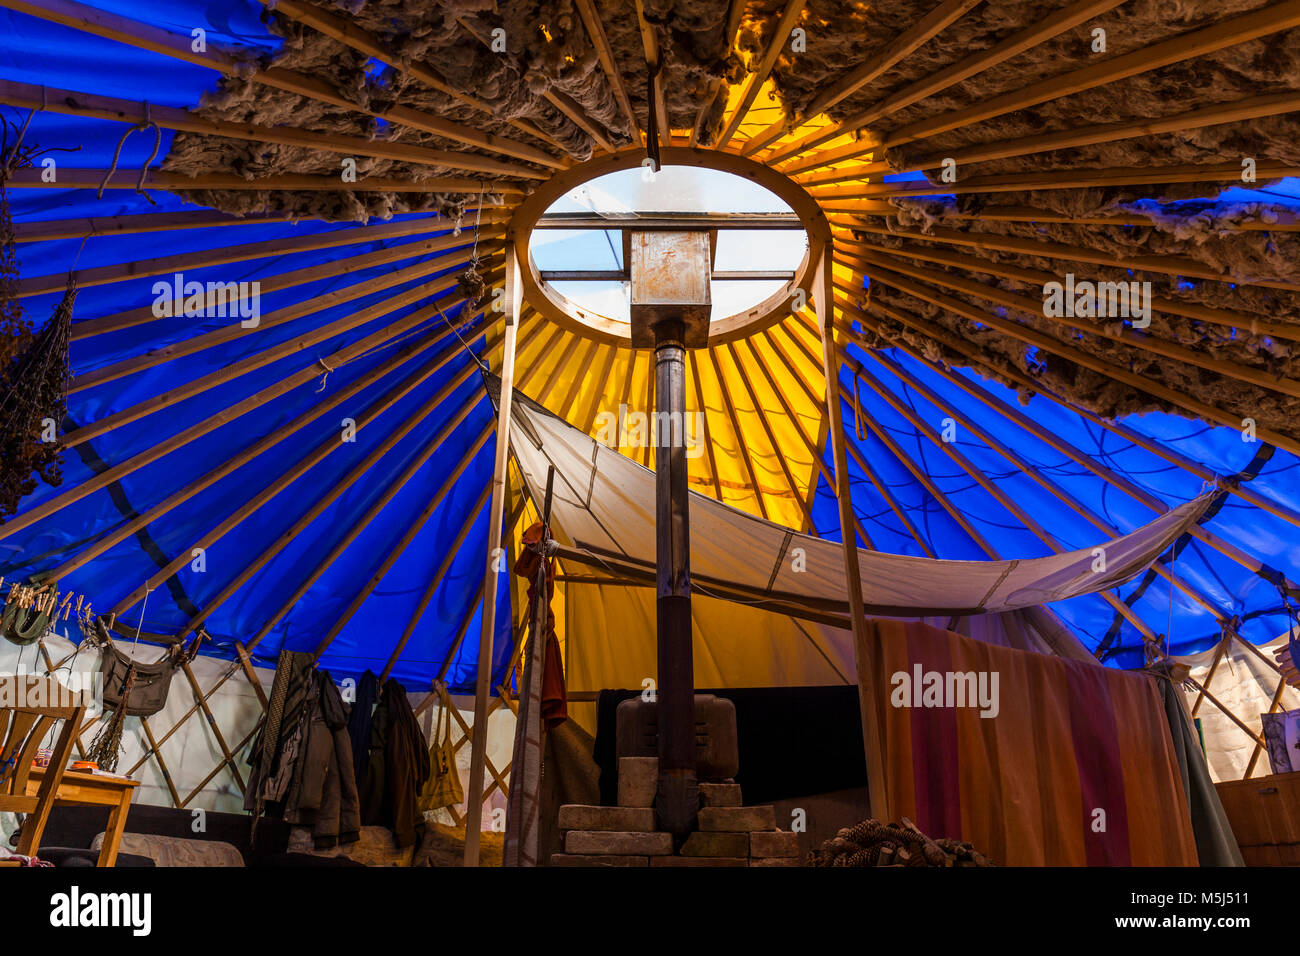 Interior of a yurt made of waste material Stock Photo